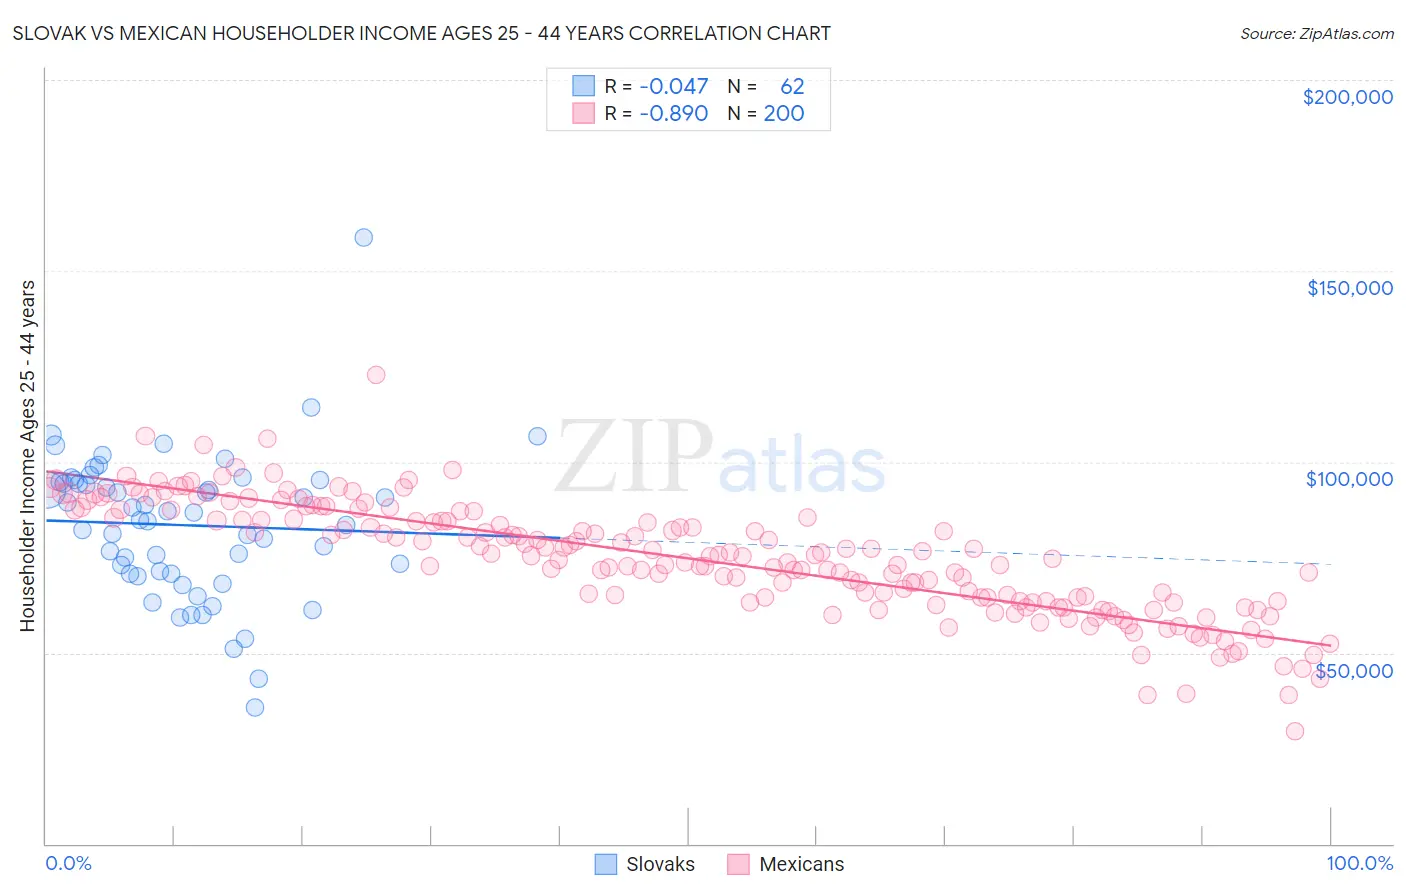 Slovak vs Mexican Householder Income Ages 25 - 44 years